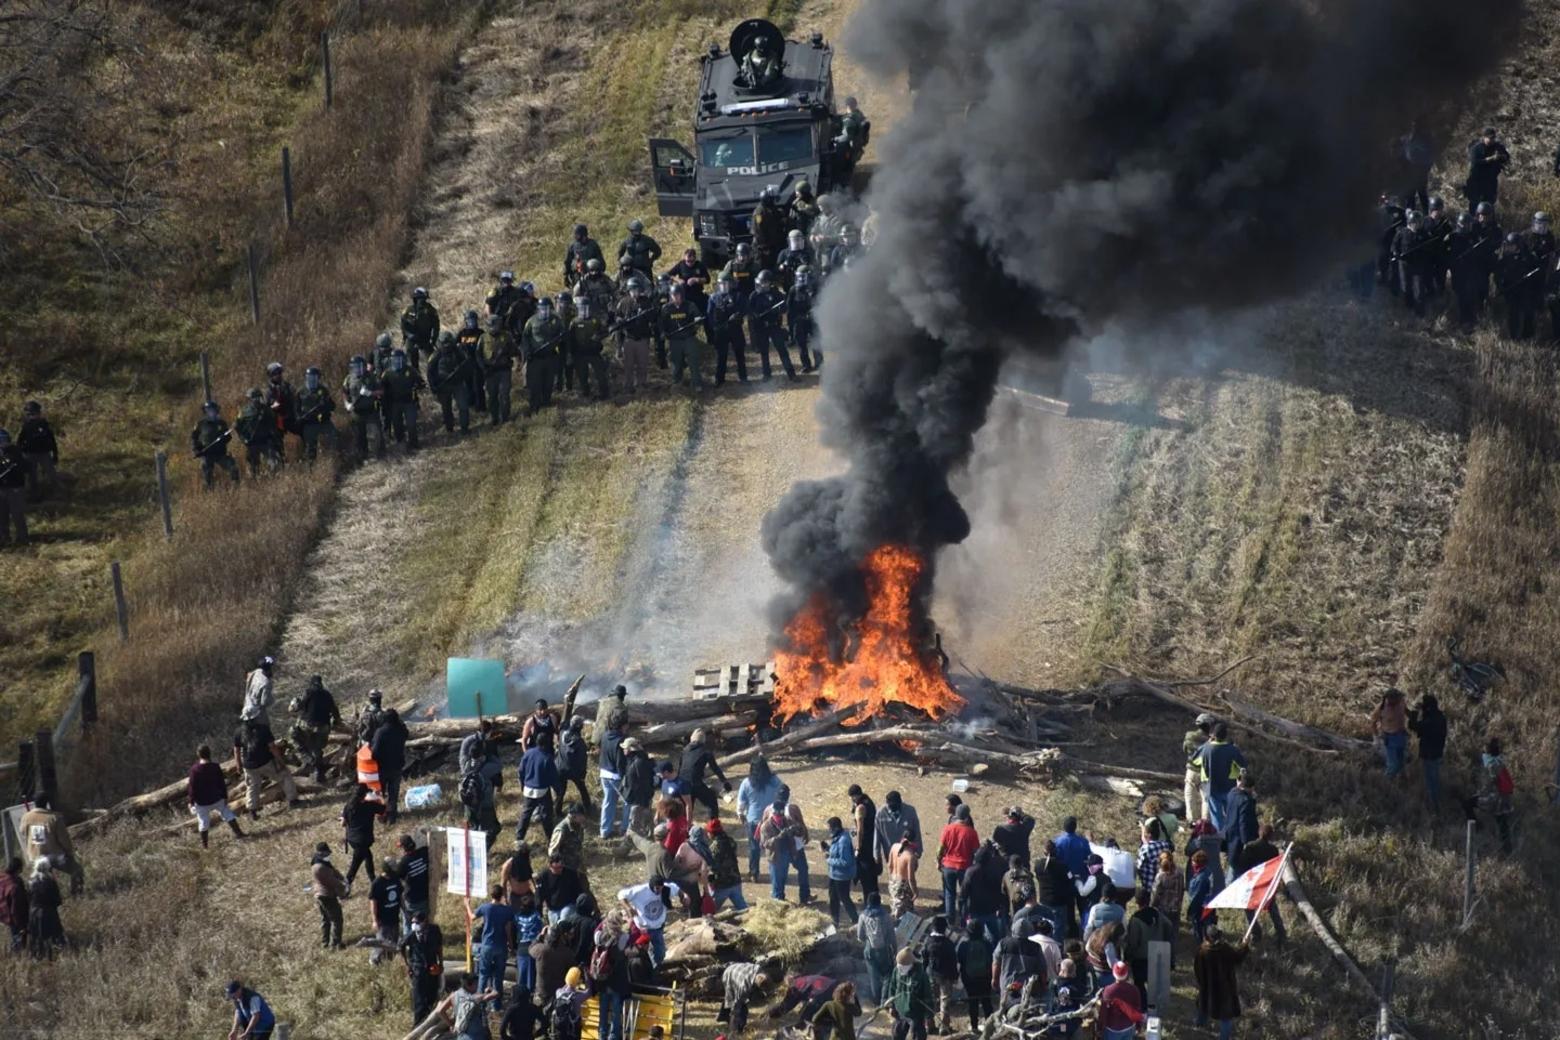 Protesters at the Standing Rock demonstrations in 2016 protesting the Dakota Access Pipeline blocked a road to slow police advancement. Sarah Comeau attended the protests. Law enforcement photo 